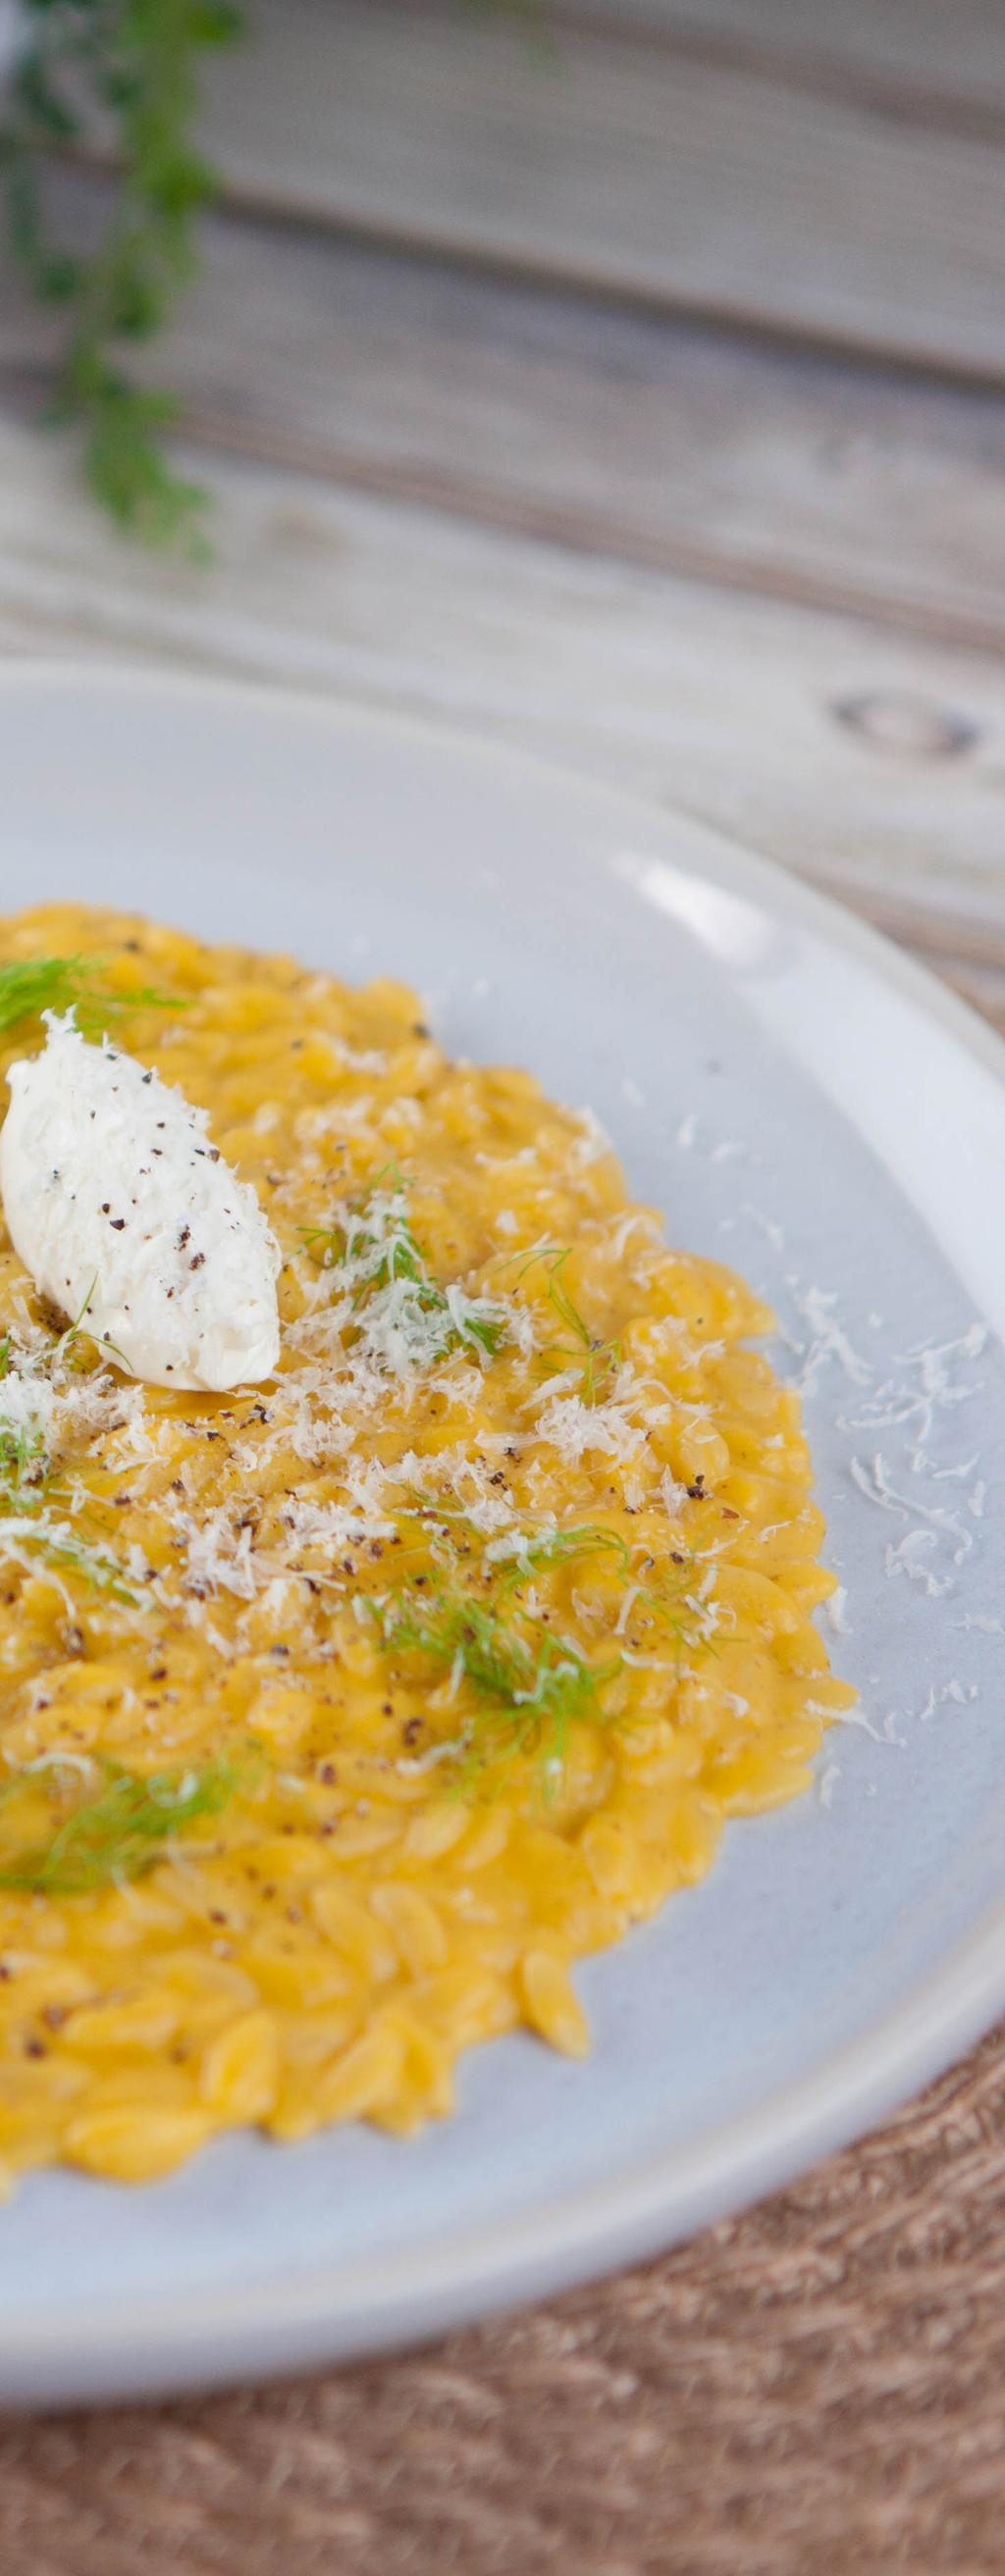 Carrot, Fennel Risotto with Labneh Dumplings 1 x 500g packet San Remo Risoni 50g butter 1 tbsp extra virgin olive oil 2 bunches of Dutch carrots, peeled and roughly chopped 1 small white onion,